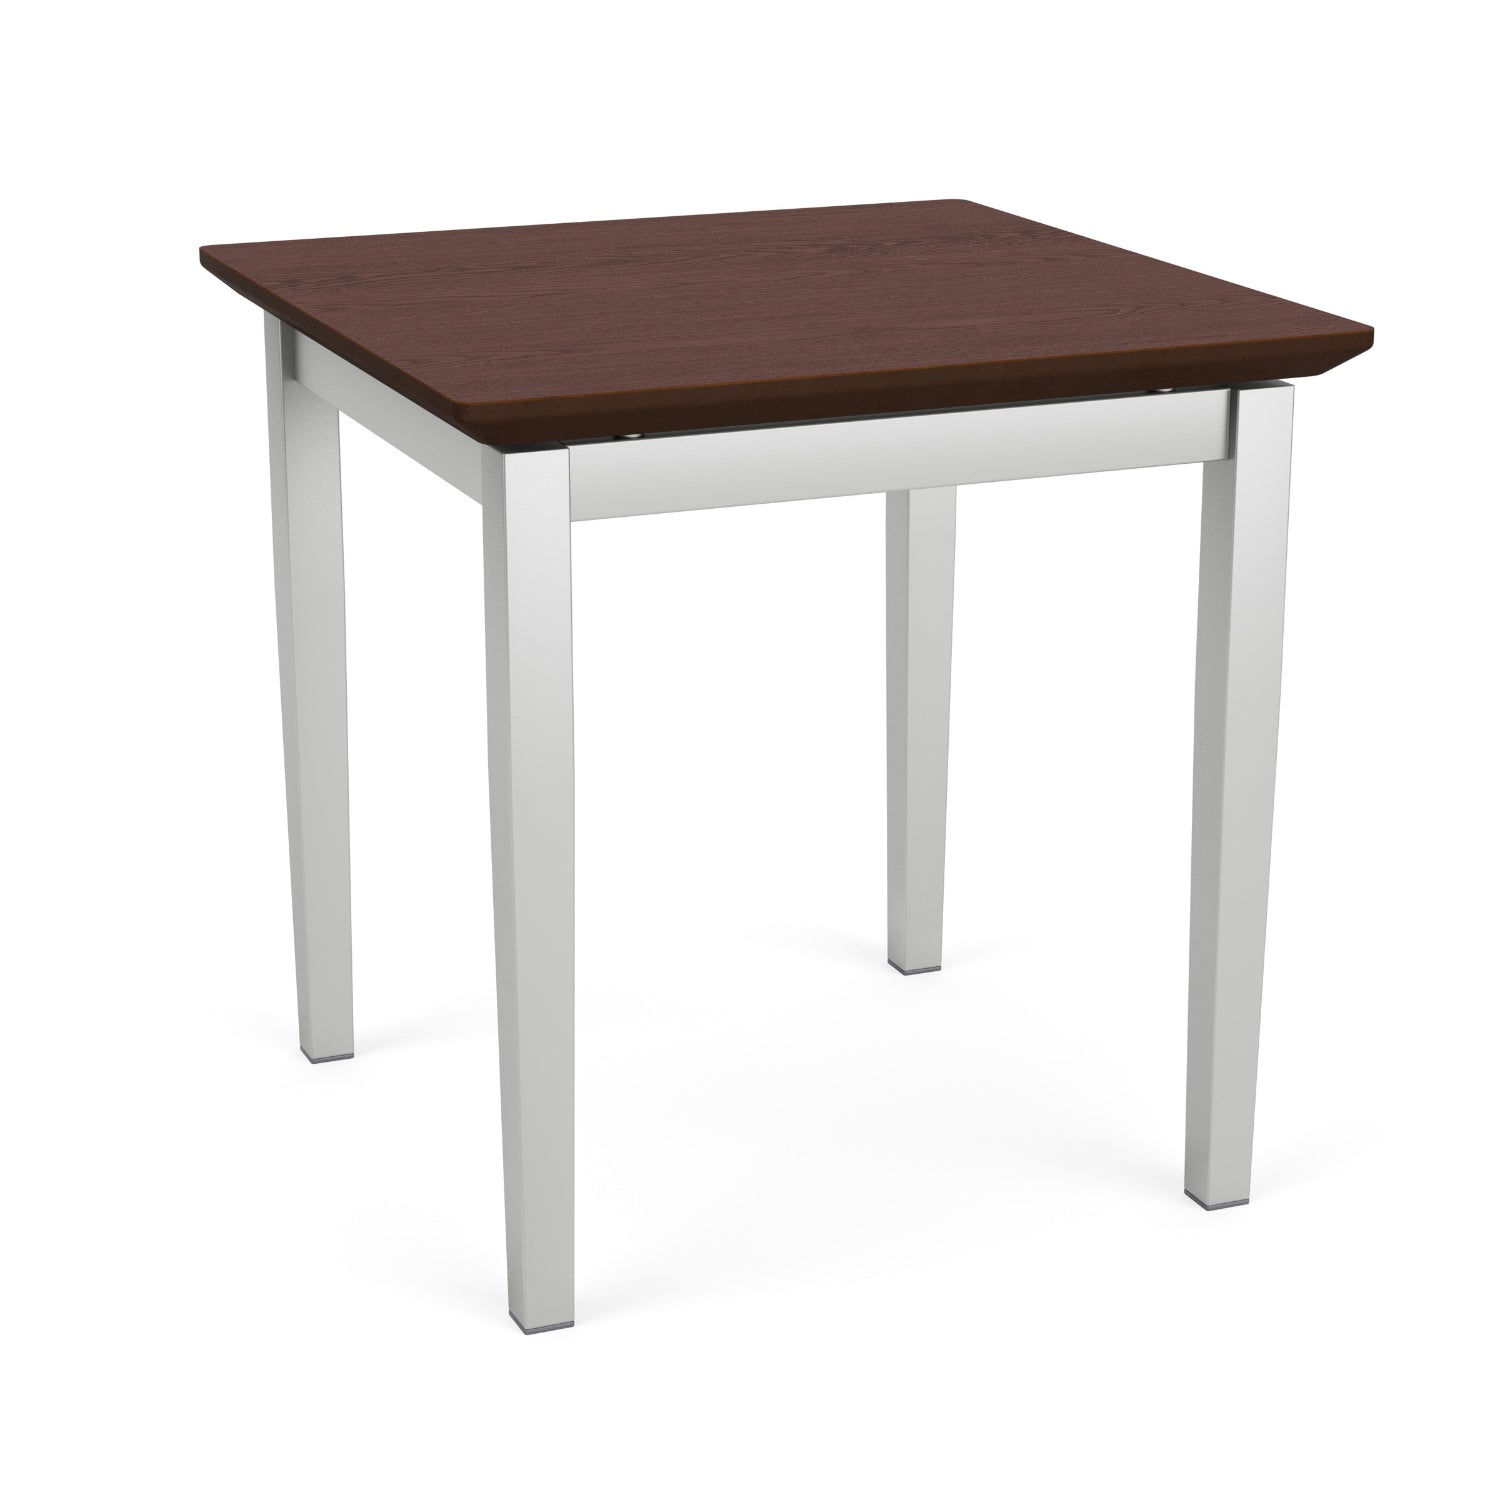 Amherst Steel Collection End Table with Laminate Tabletop, FREE SHIPPING